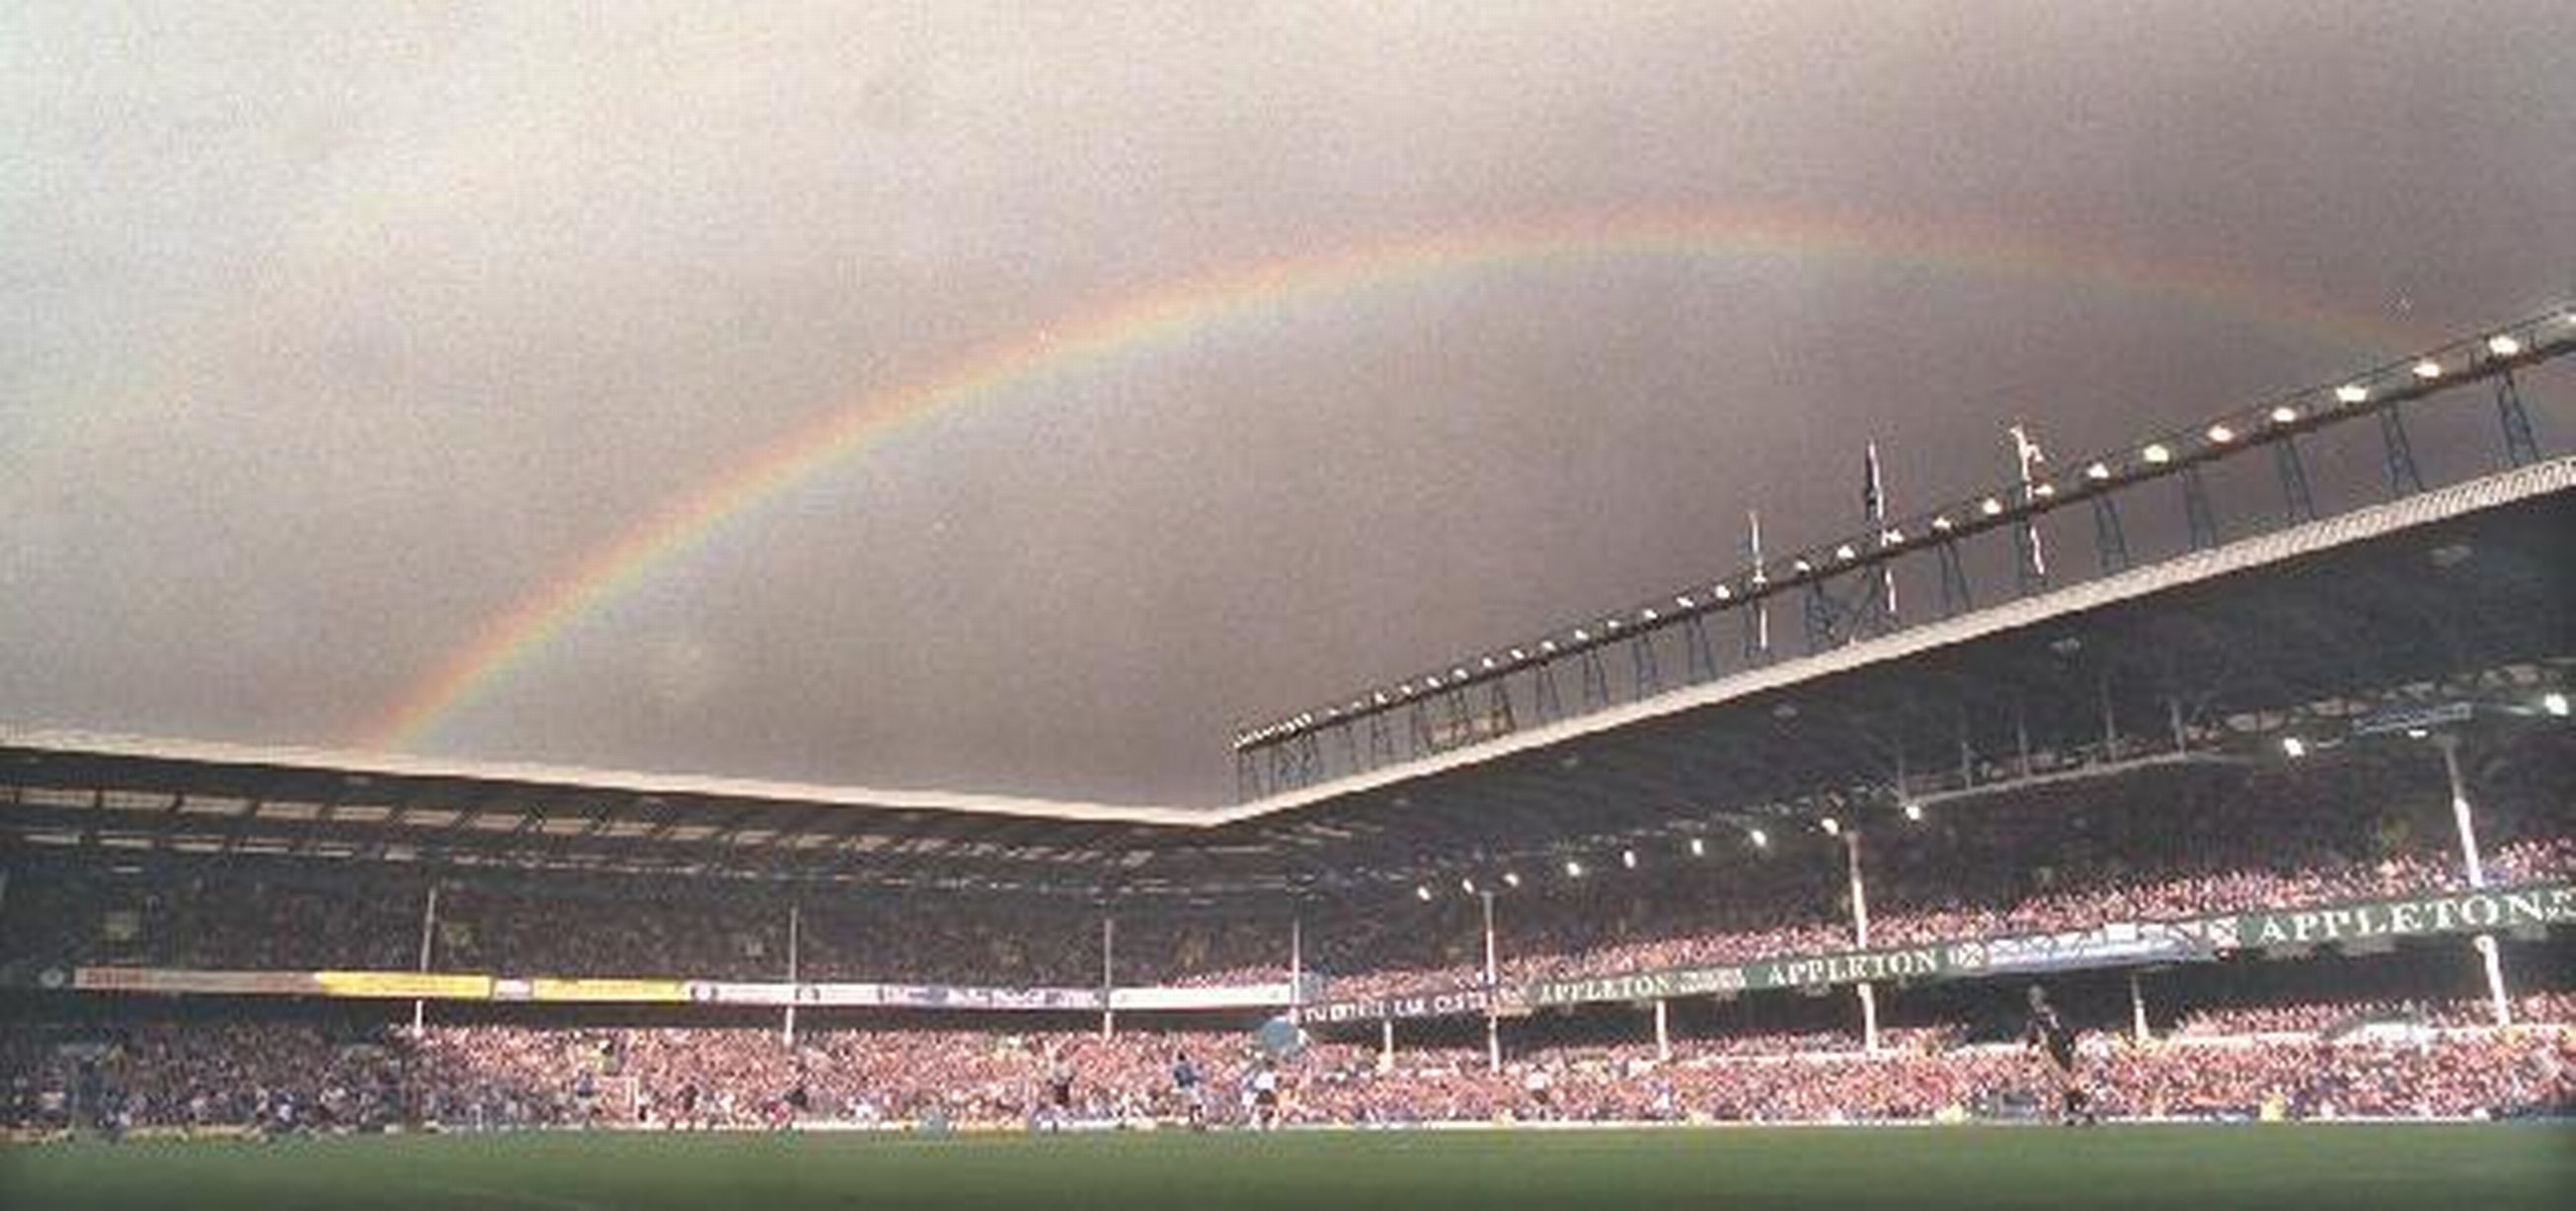 image-4-for-archive-pictures-of-goodison-park-home-of-everton-fc-gallery-901939206.jpg